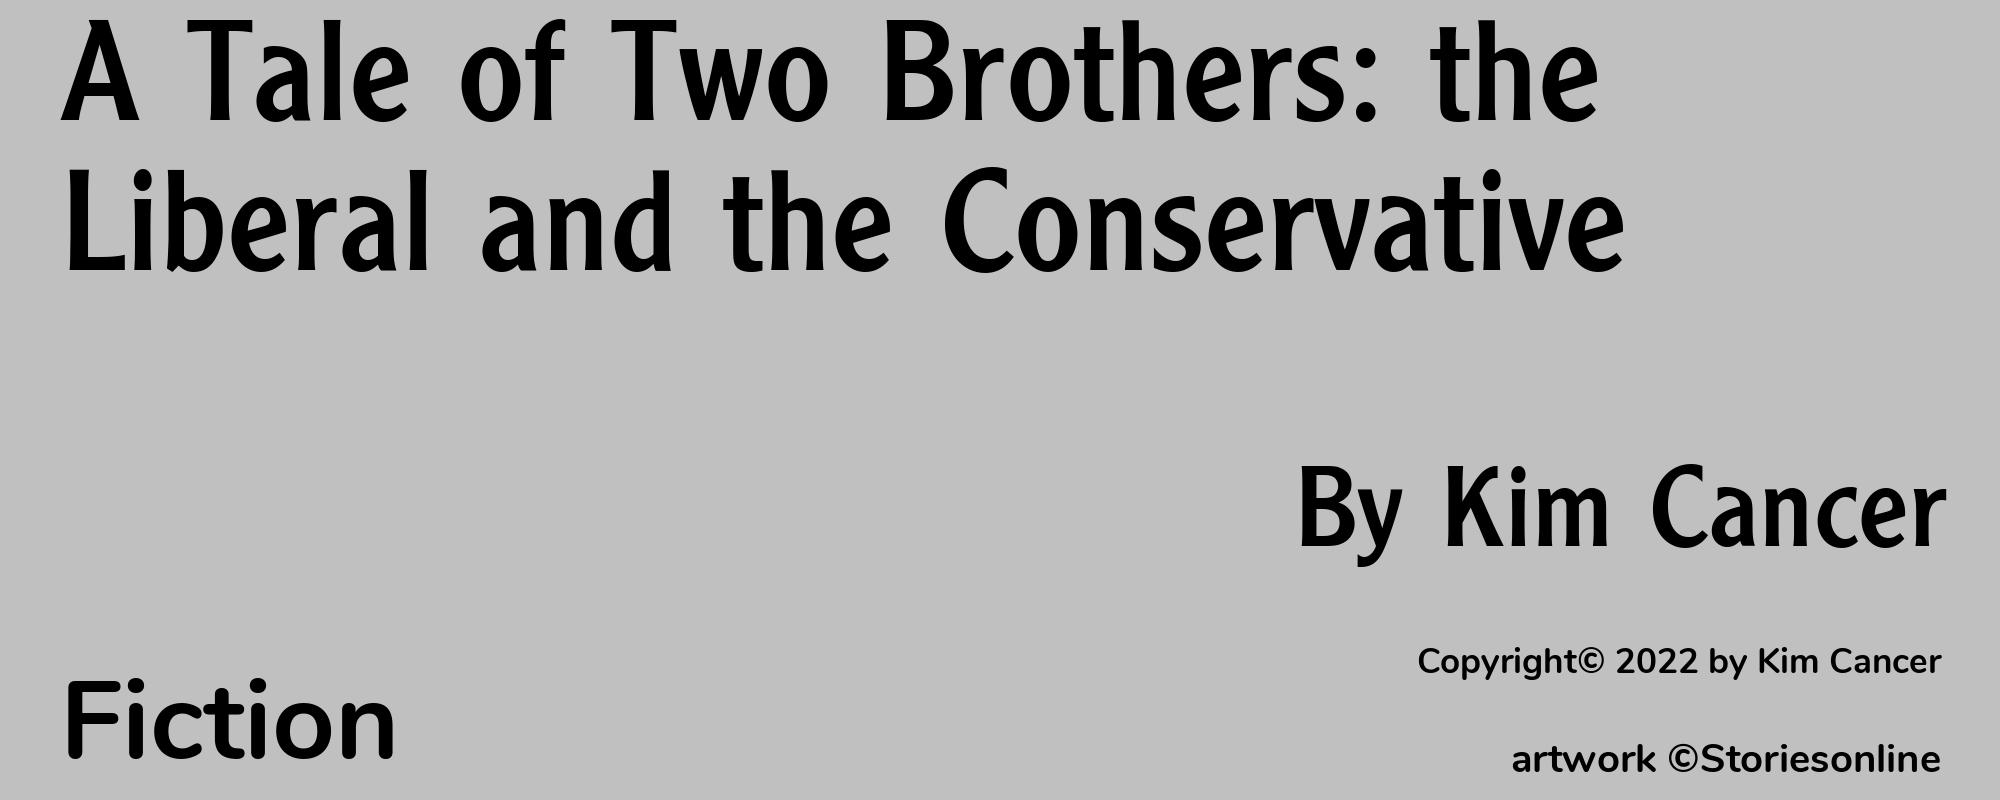 A Tale of Two Brothers: the Liberal and the Conservative - Cover